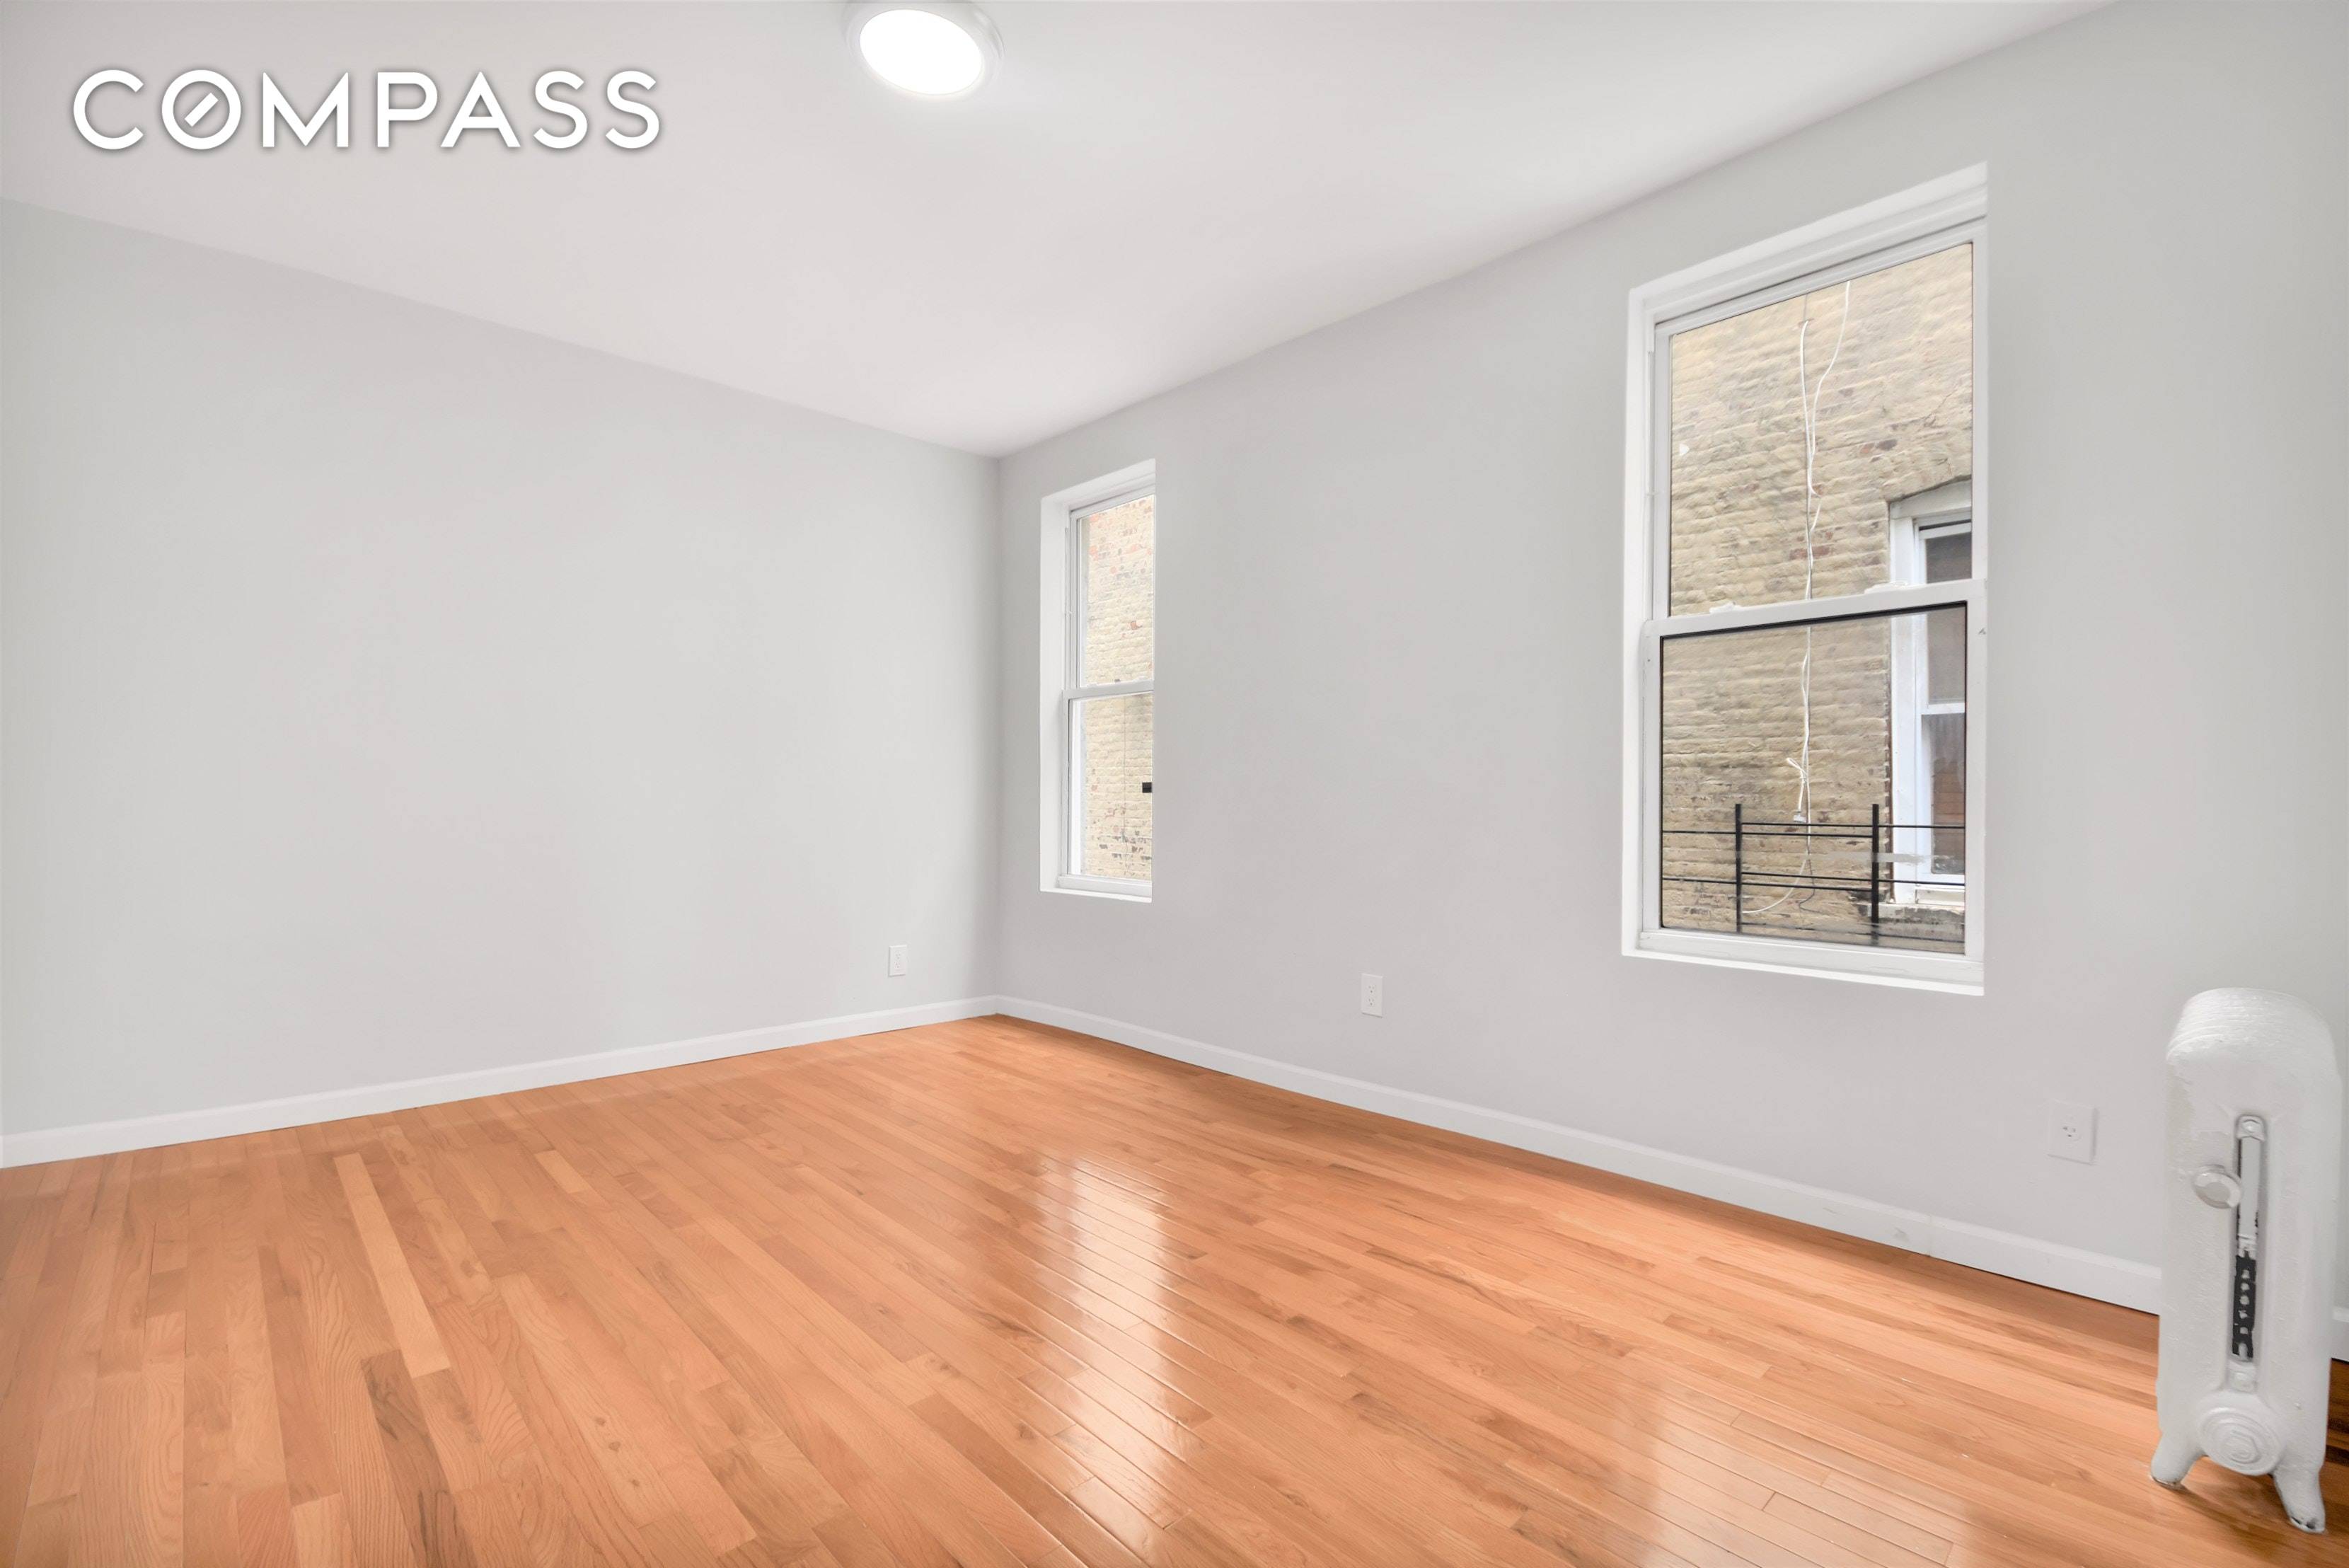 Be the first to live in this newly renovated spacious 1 bed 2 bath with a fully finished basement.